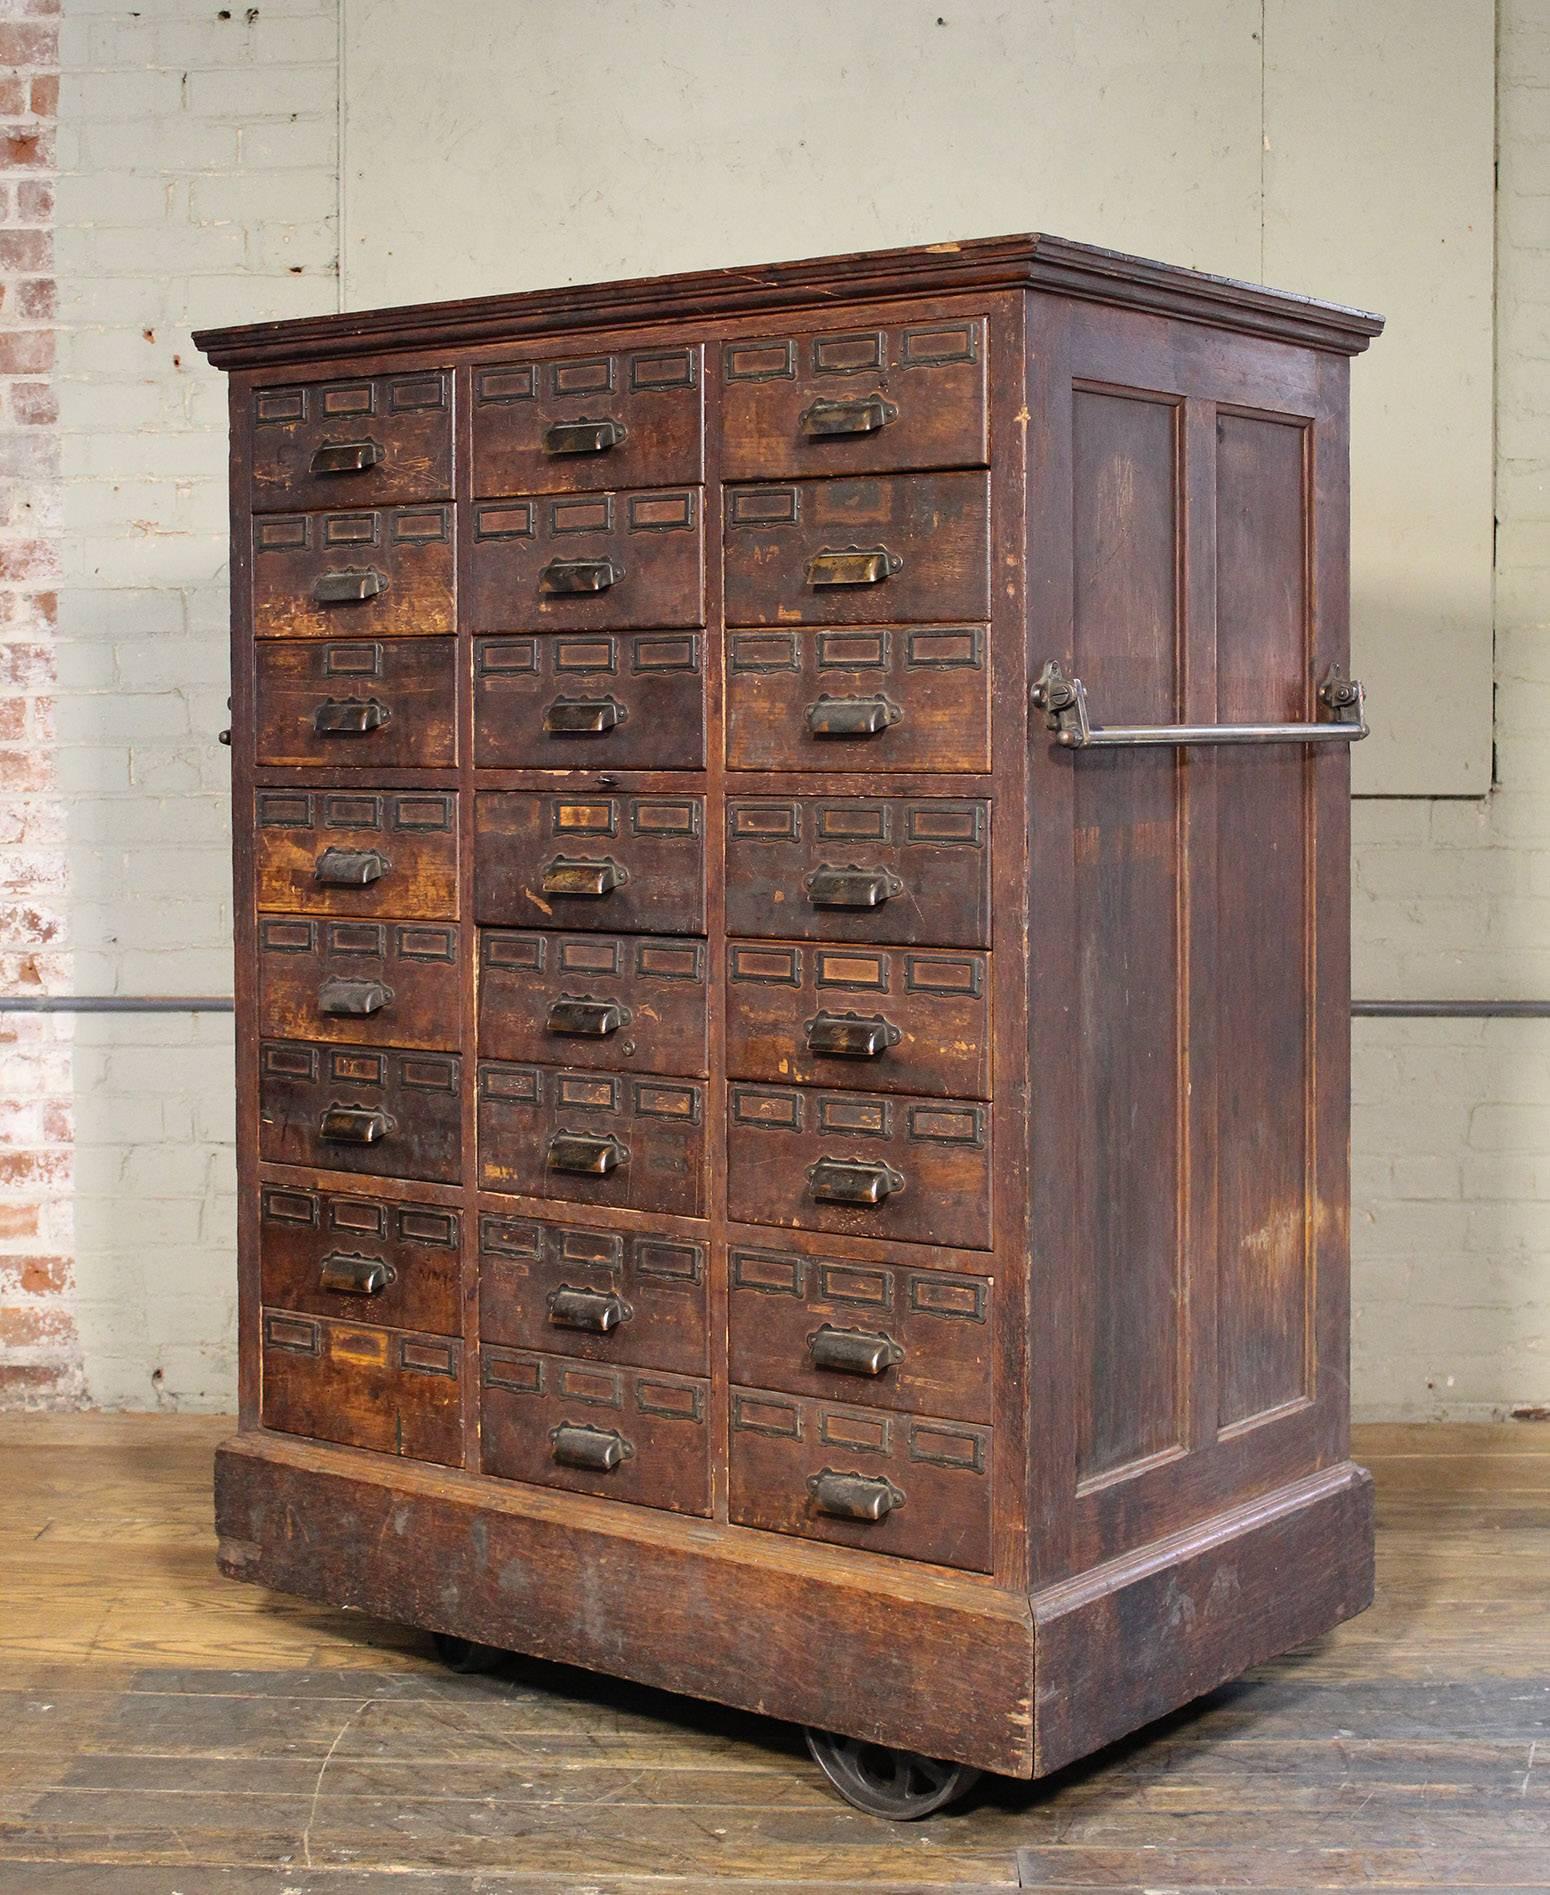 Rolling distressed apothecary wood storage cabinet, vintage Industrial with brass hardware. Lower six drawers are double drawers. Cabinet is on four cast iron wheels, two are swivel. Overall dimensions measure 40 1/2" x 25 1/2" x 53